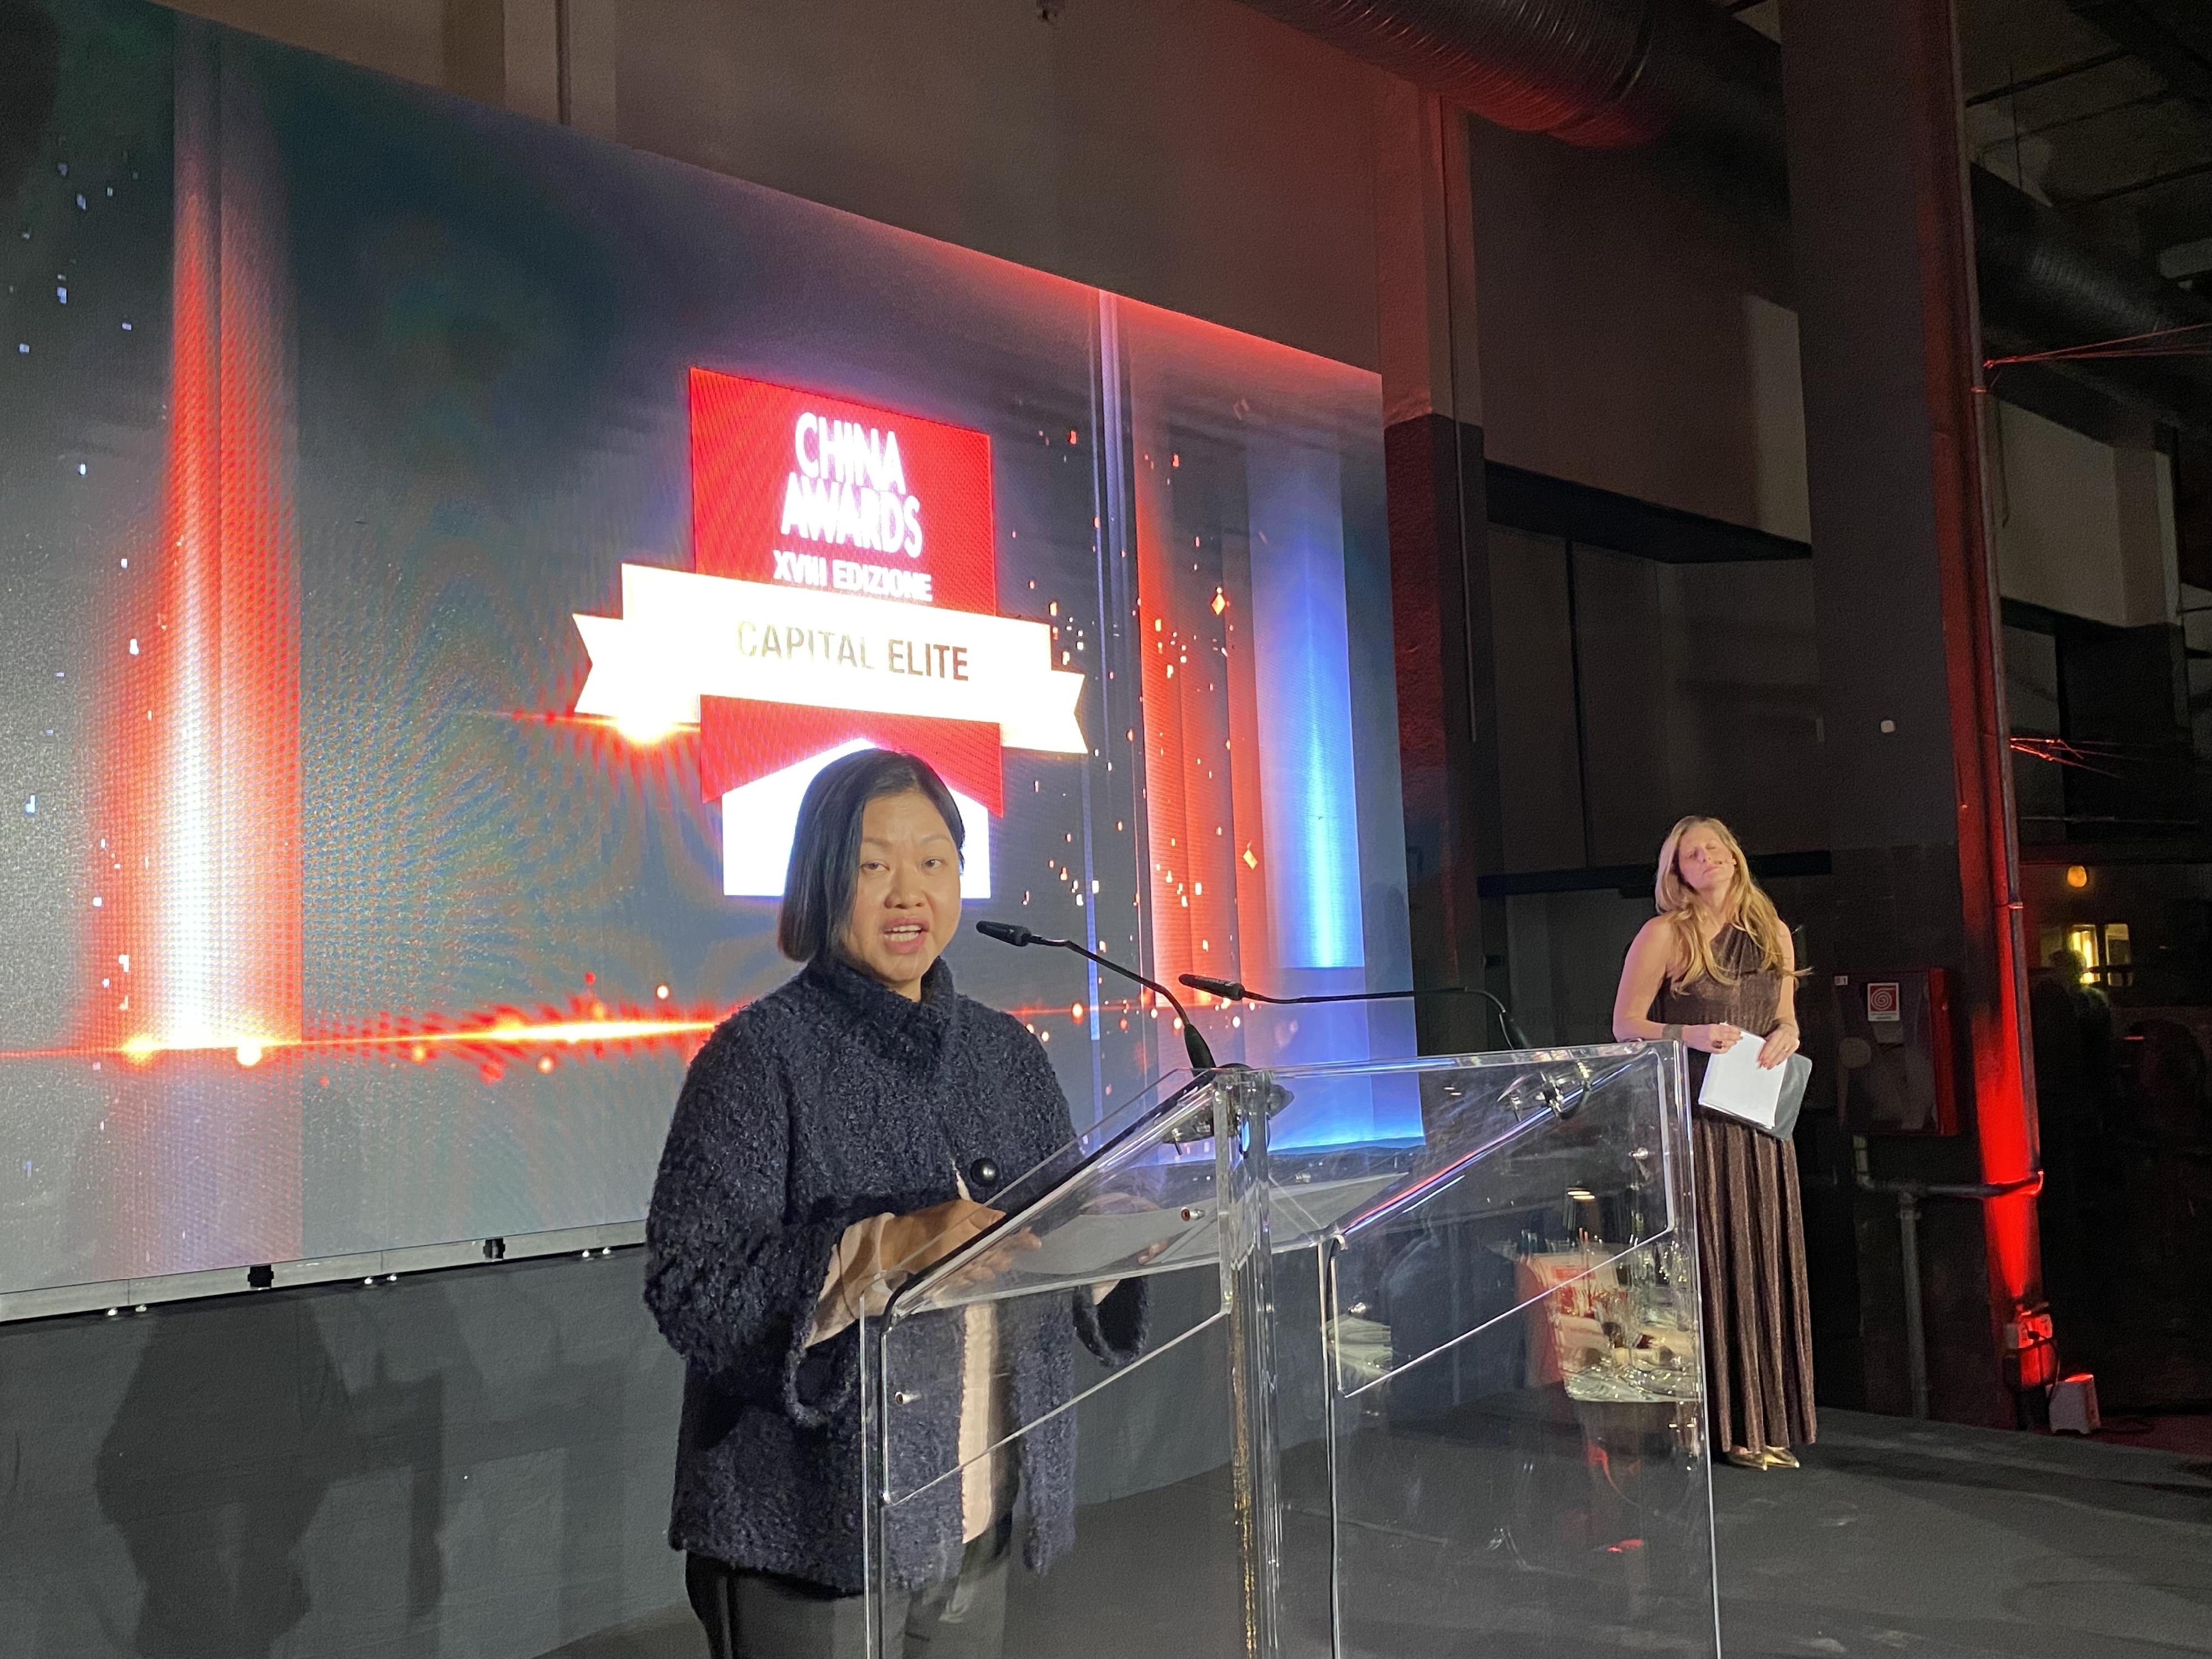 The Special Representative for Hong Kong Economic and Trade Affairs to the European Union, Ms Shirley Yung, delivered a speech at the 18th China Awards organised by the Italy China Council Foundation in Milan, Italy on December 13 (Milan time). Miss Yung highlighted Hong Kong’s unique status as a gateway between China and the rest of the world and invited Italian entrepreneurs to grasp the opportunities Hong Kong can offer to them in their Asia business.